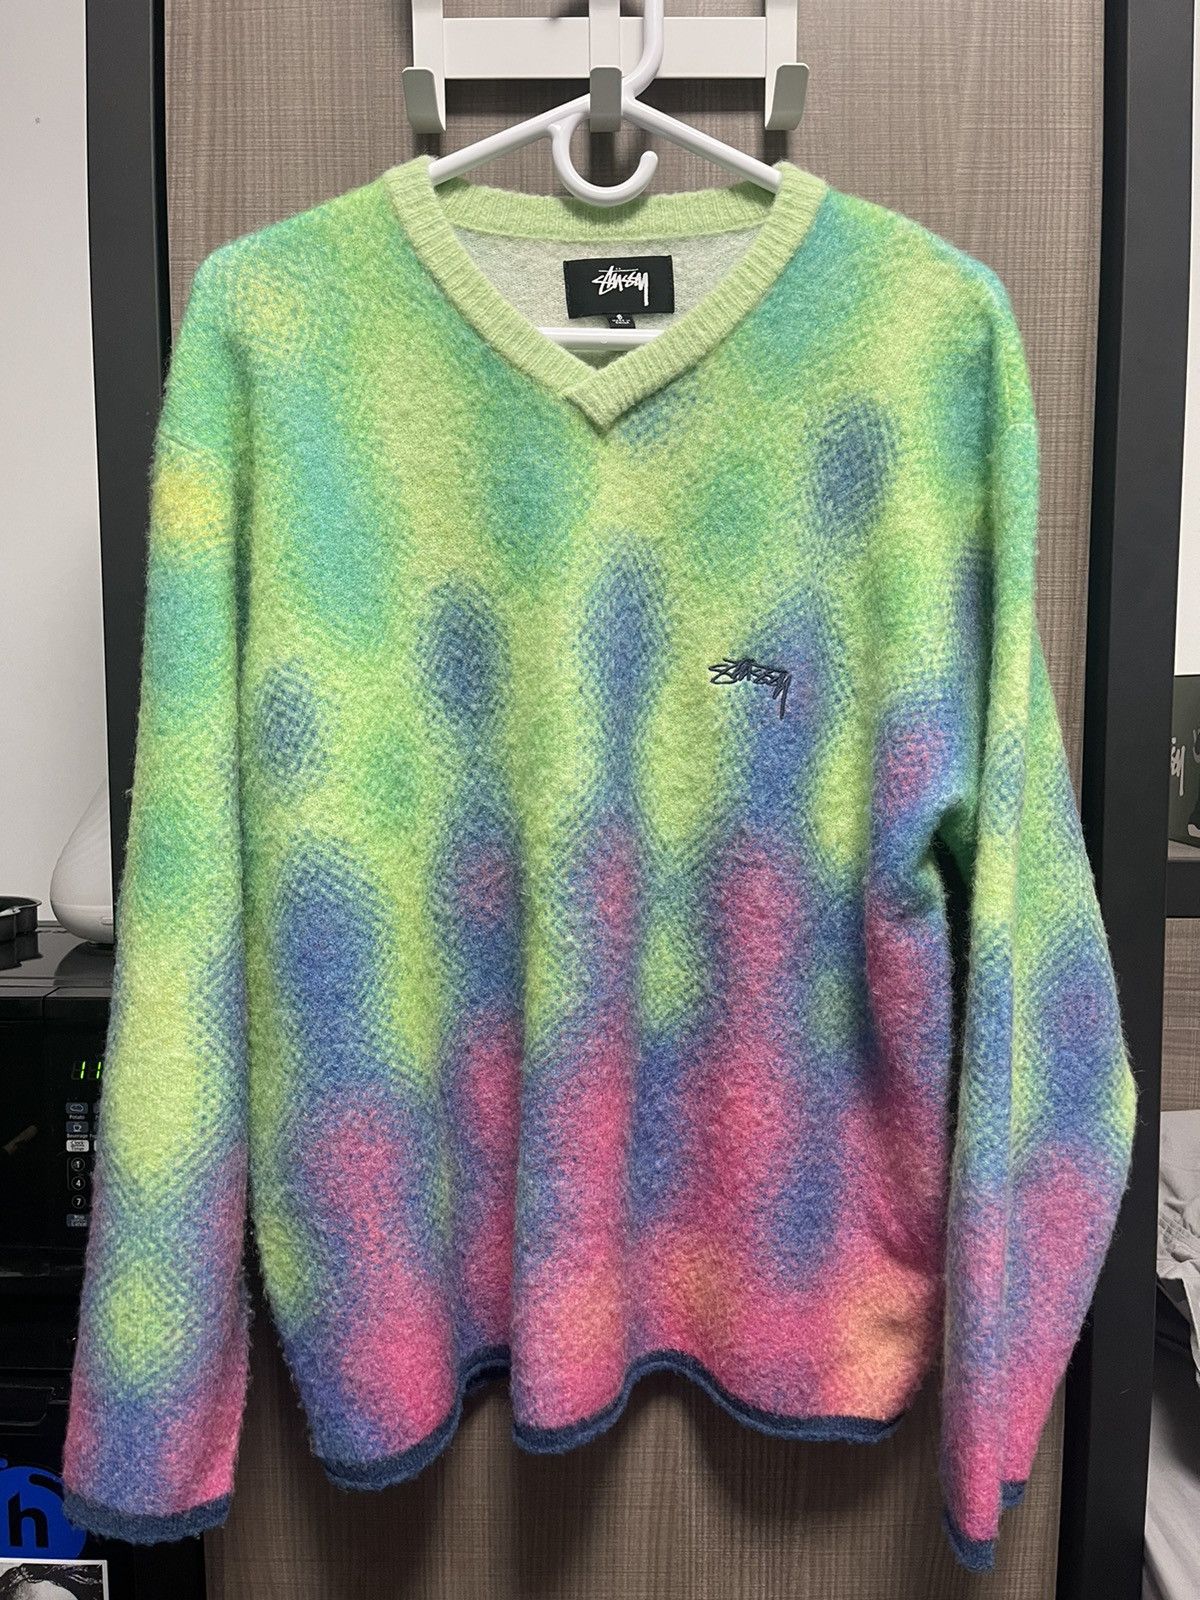 Stussy Stussy Gradient Dot Brushed Sweater | Grailed